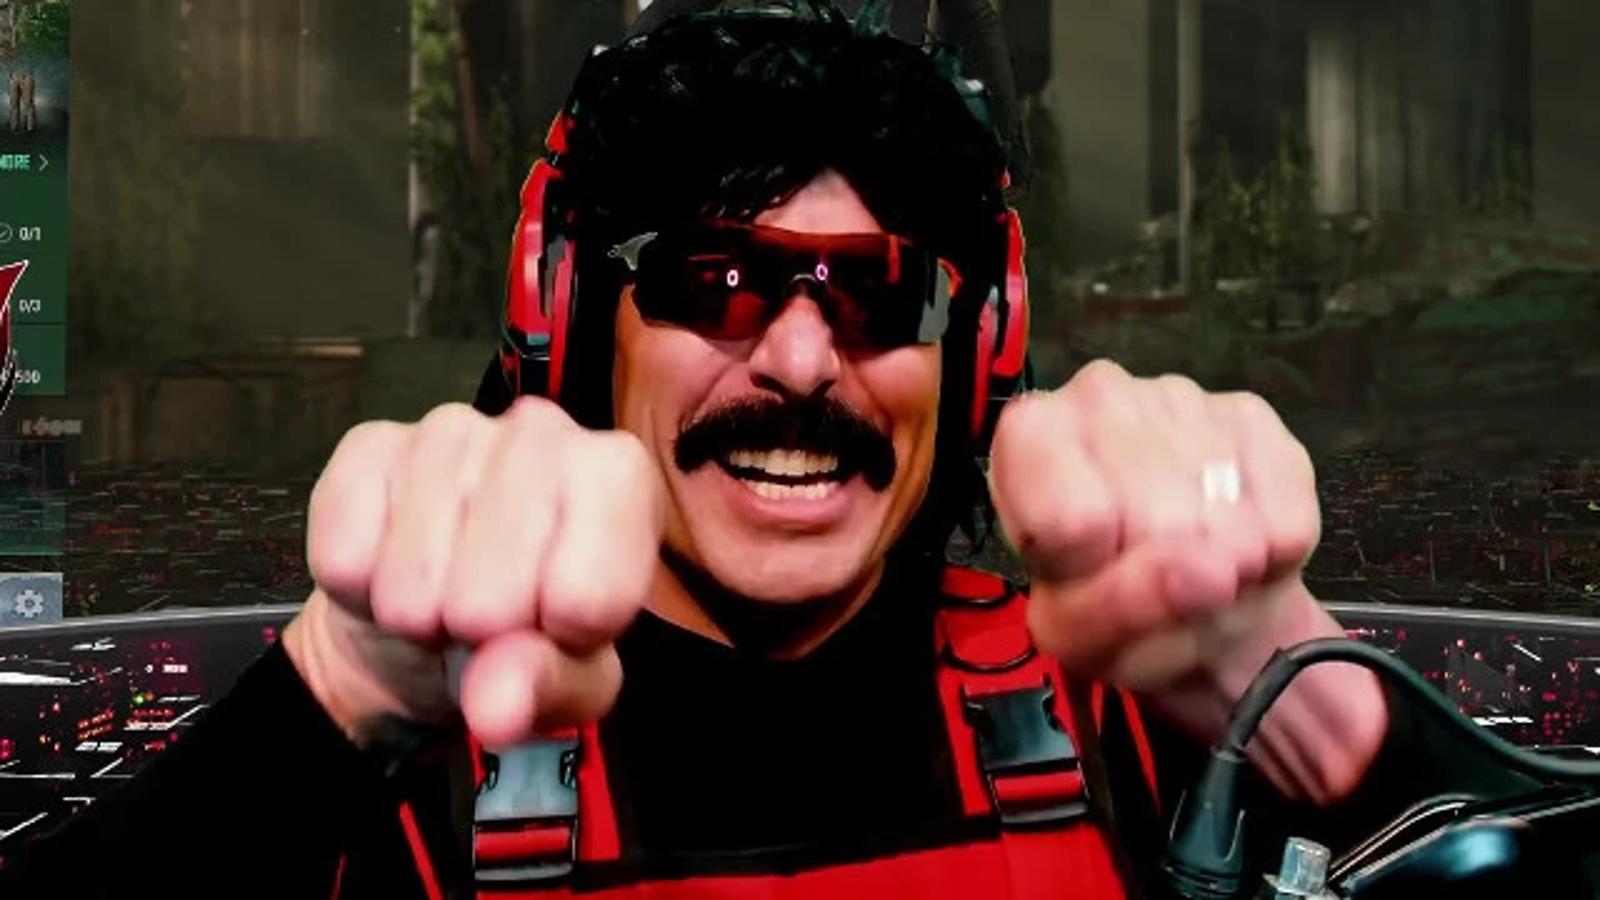 Dr Disrespect on stream giving the knuckles to chat.